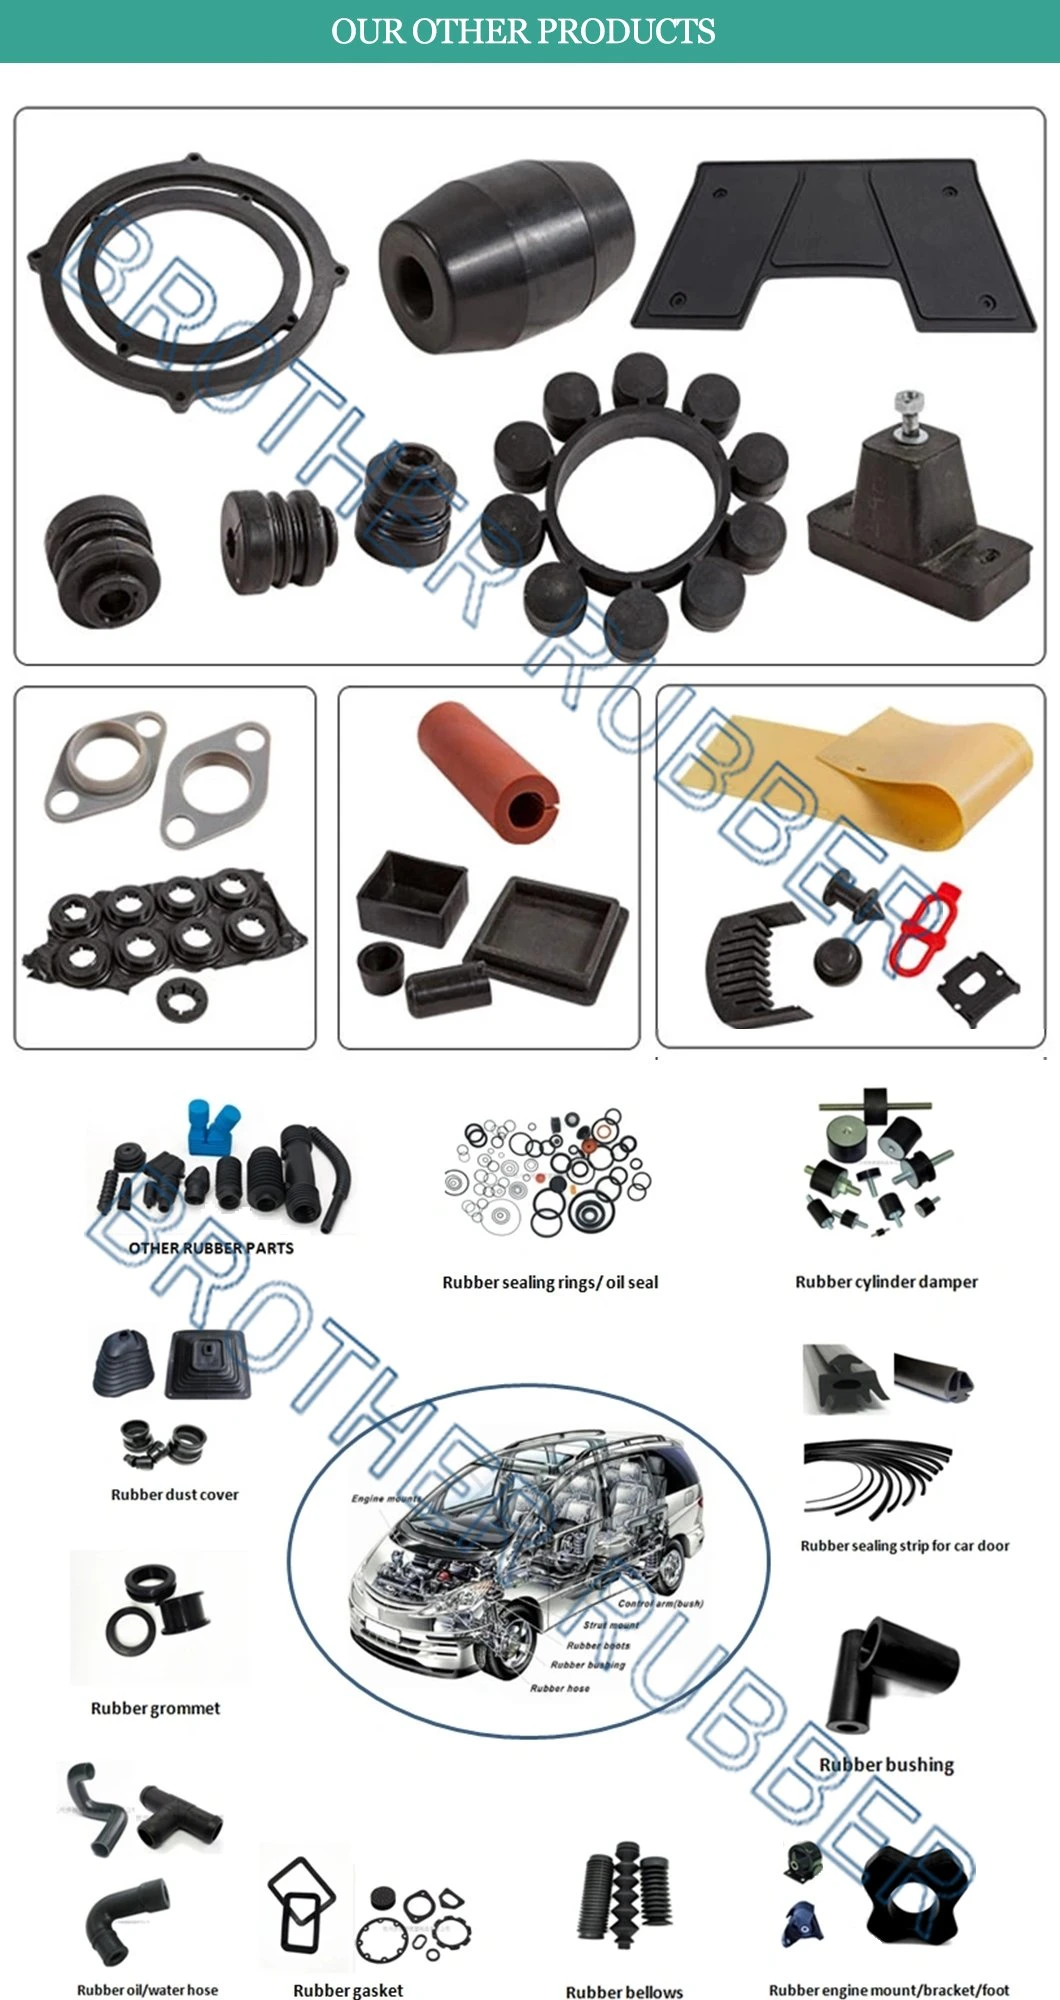 Customized Silicon/EPDM/PVC Rubber Seal Strip for Cars and Sealing